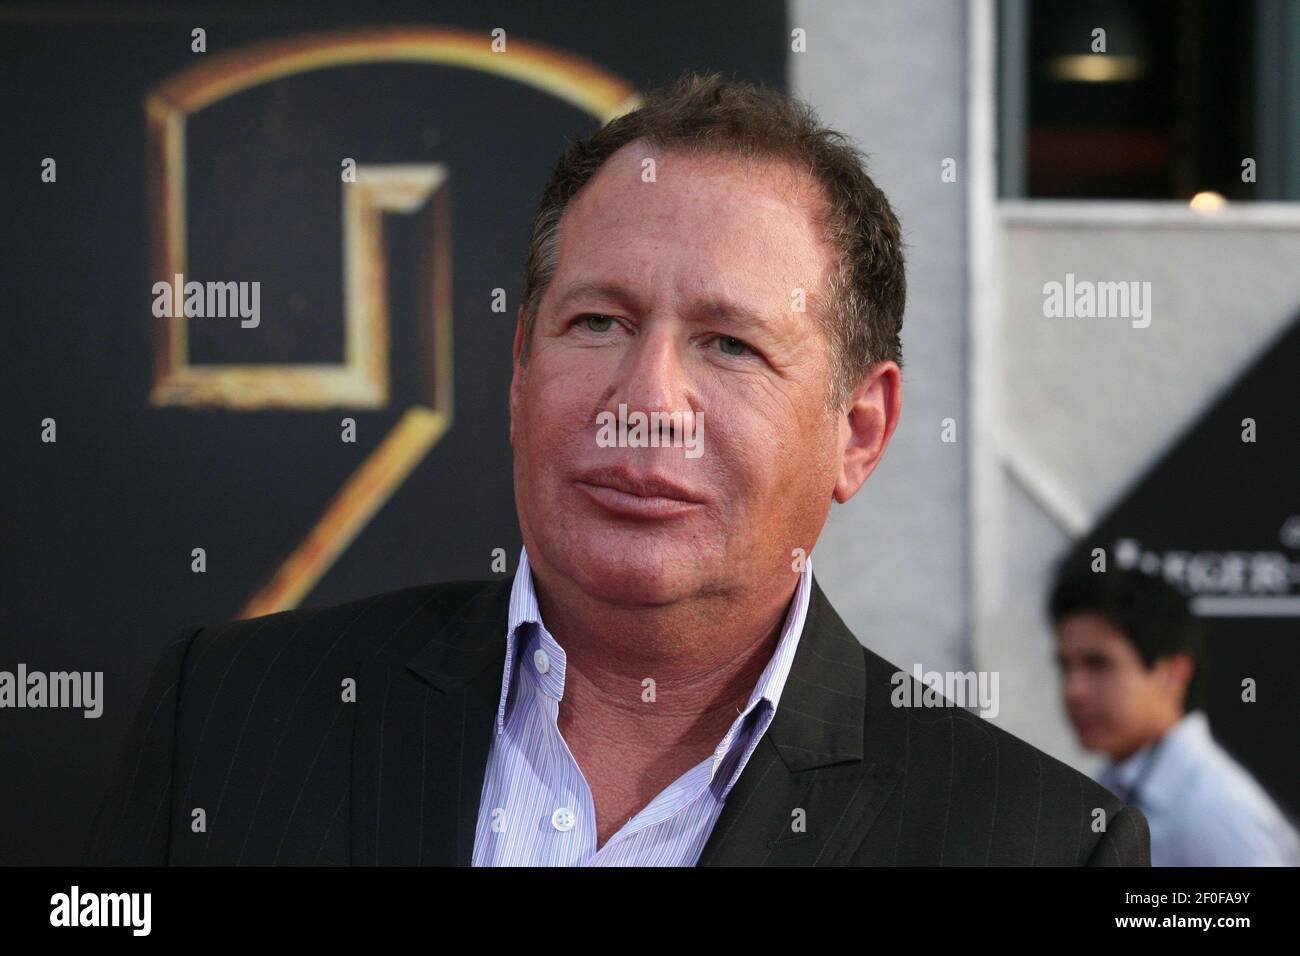 26 April 2010- Hollywood, California- Garry Shandling arrives at the  premiere for 'Iron Man 2' in Hollywood, California. Photo Credit: Krista  Kennell/Sipa Press. /ironmantwopremiere.76/1004270744 Stock Photo - Alamy